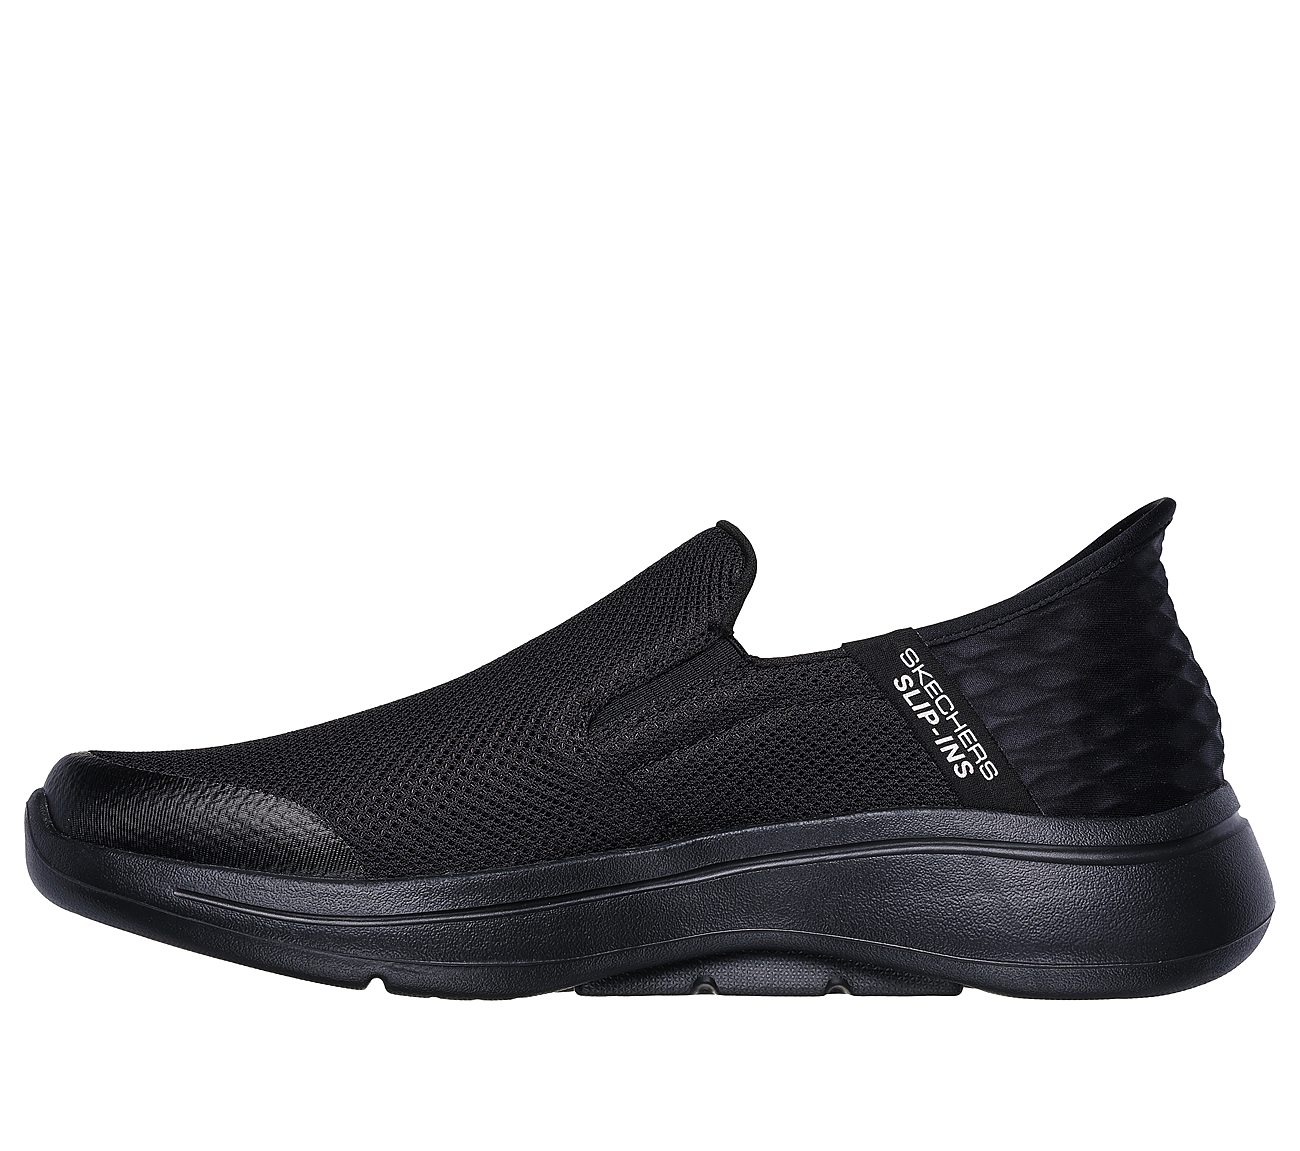 Skechers Black Go Walk Arch Fit Hands Free Mens Walking Shoes Style ID ...